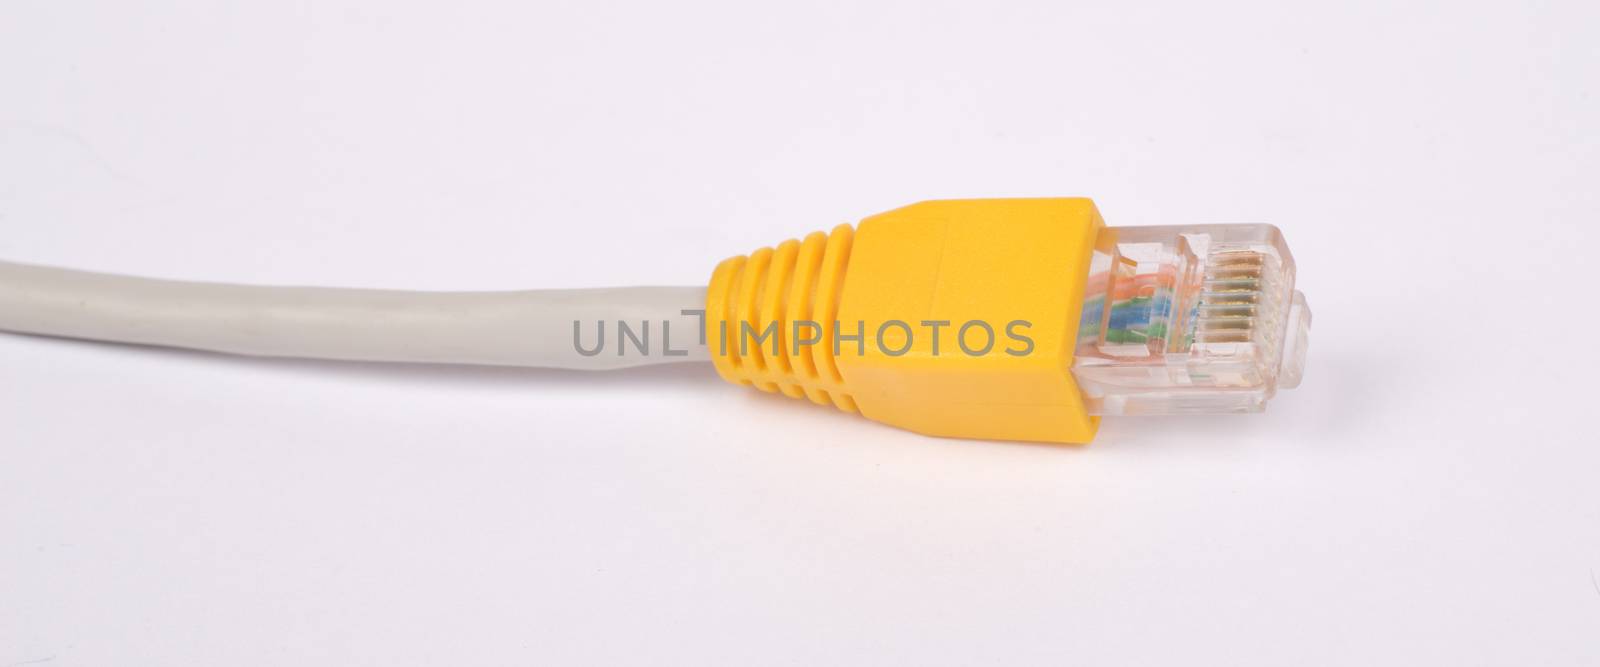 Yellow computer cable on isolated white background, close up view